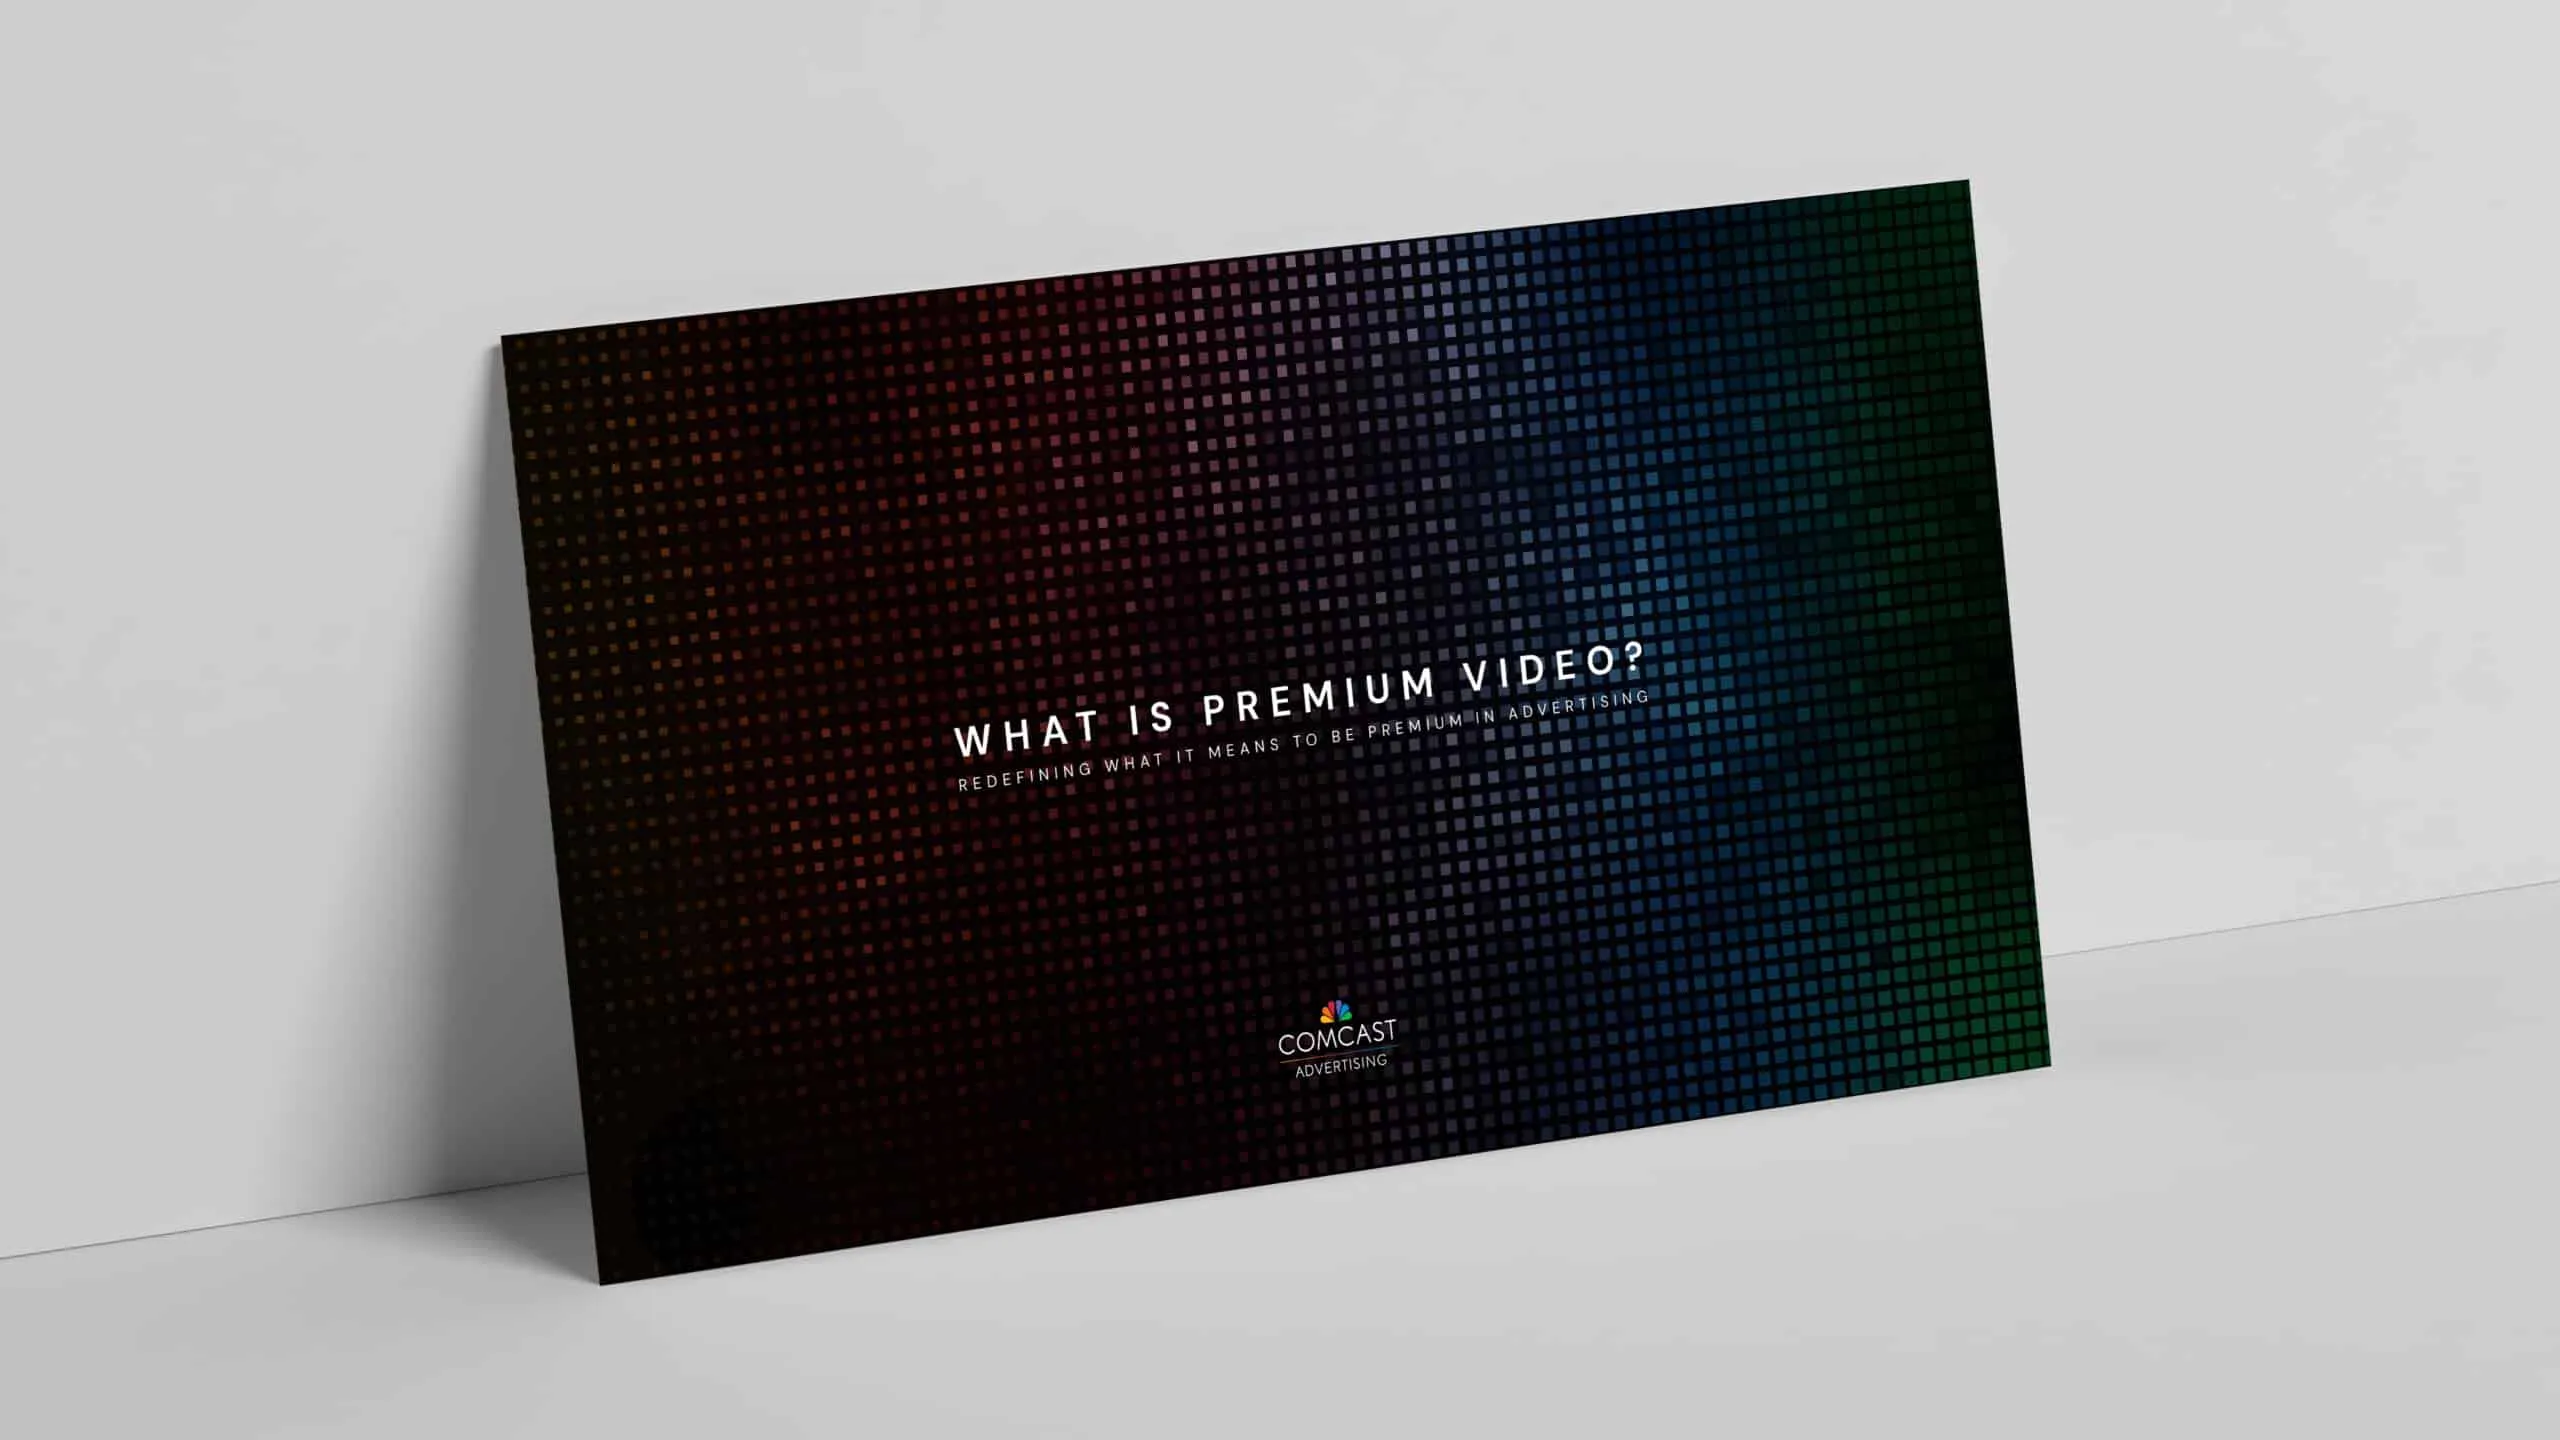 Redefining What it Means to be “Premium” in Advertising